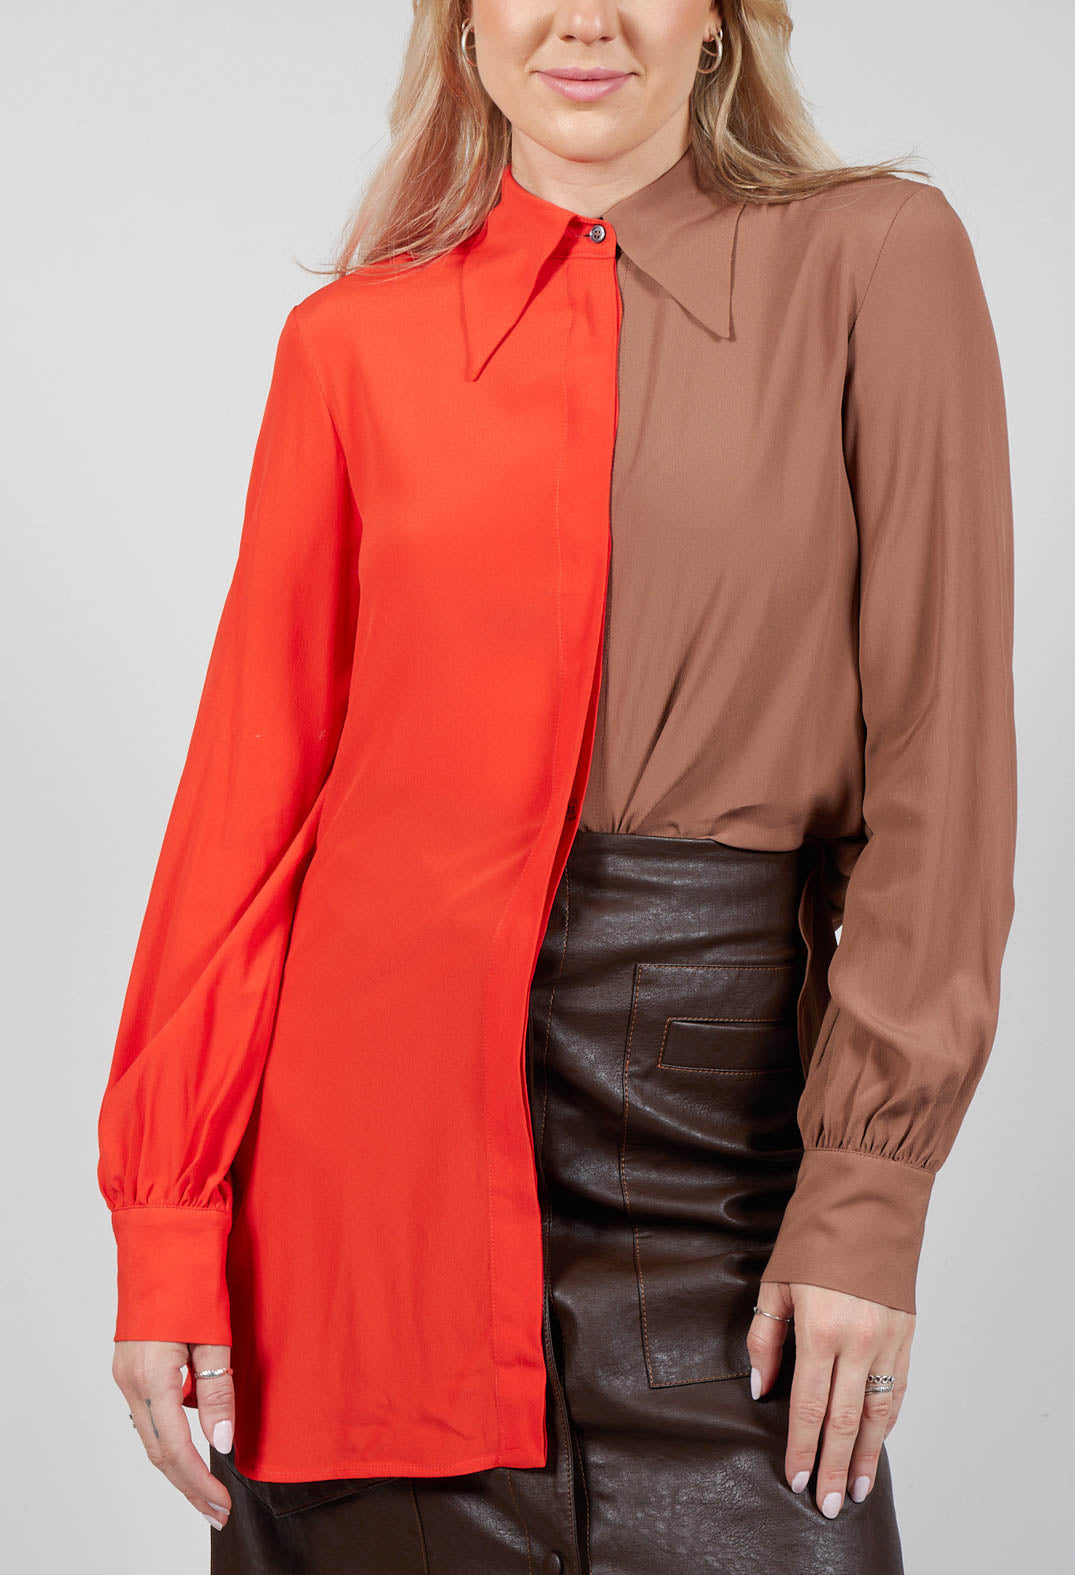 Contrast Tailored Shirt in Orange / Brown